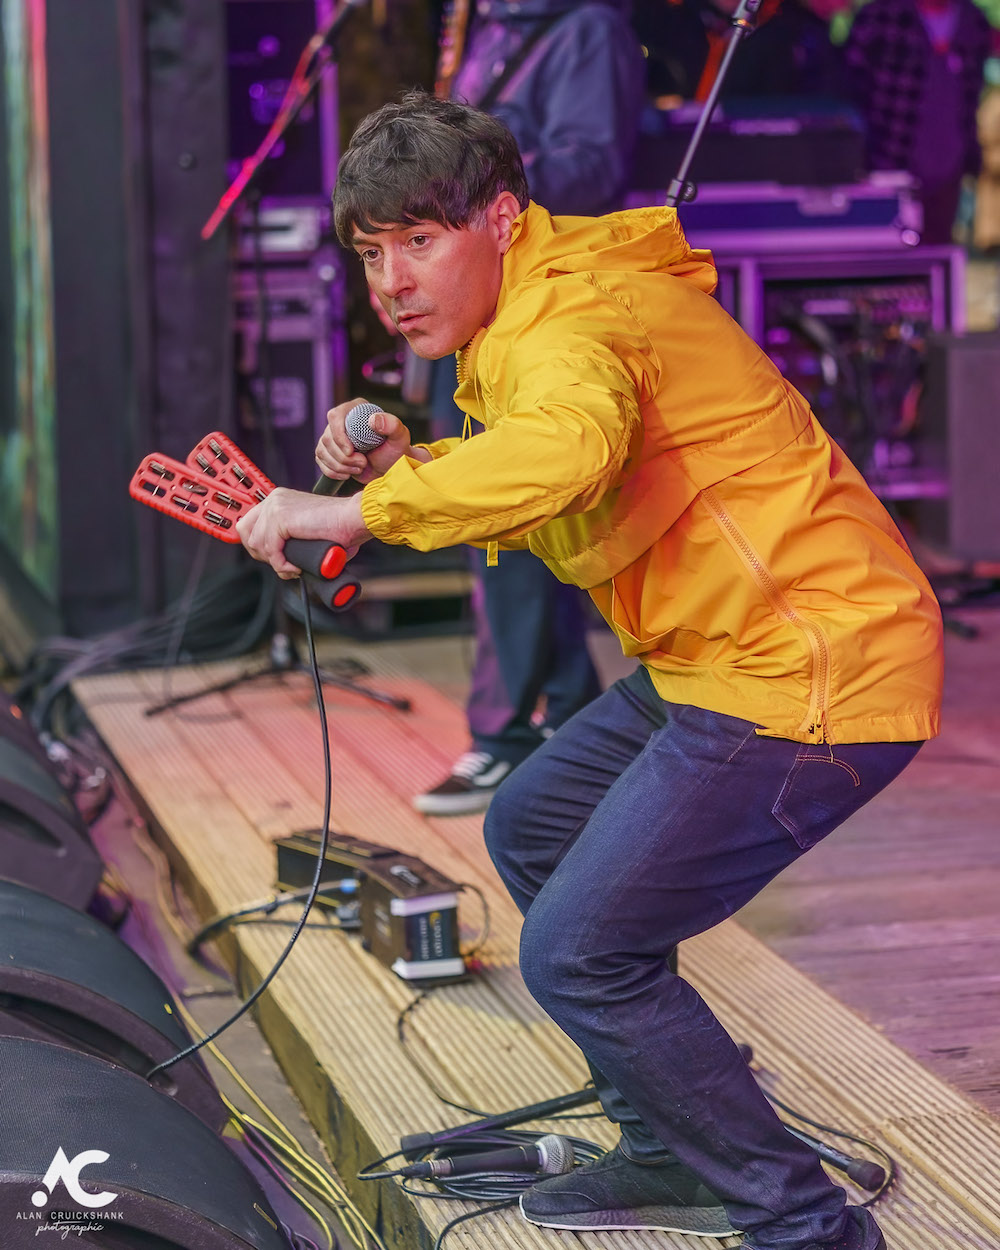 The Complete Stone Roses at Woodzstock 2022 74 - Woodzstock, 2022 - Images